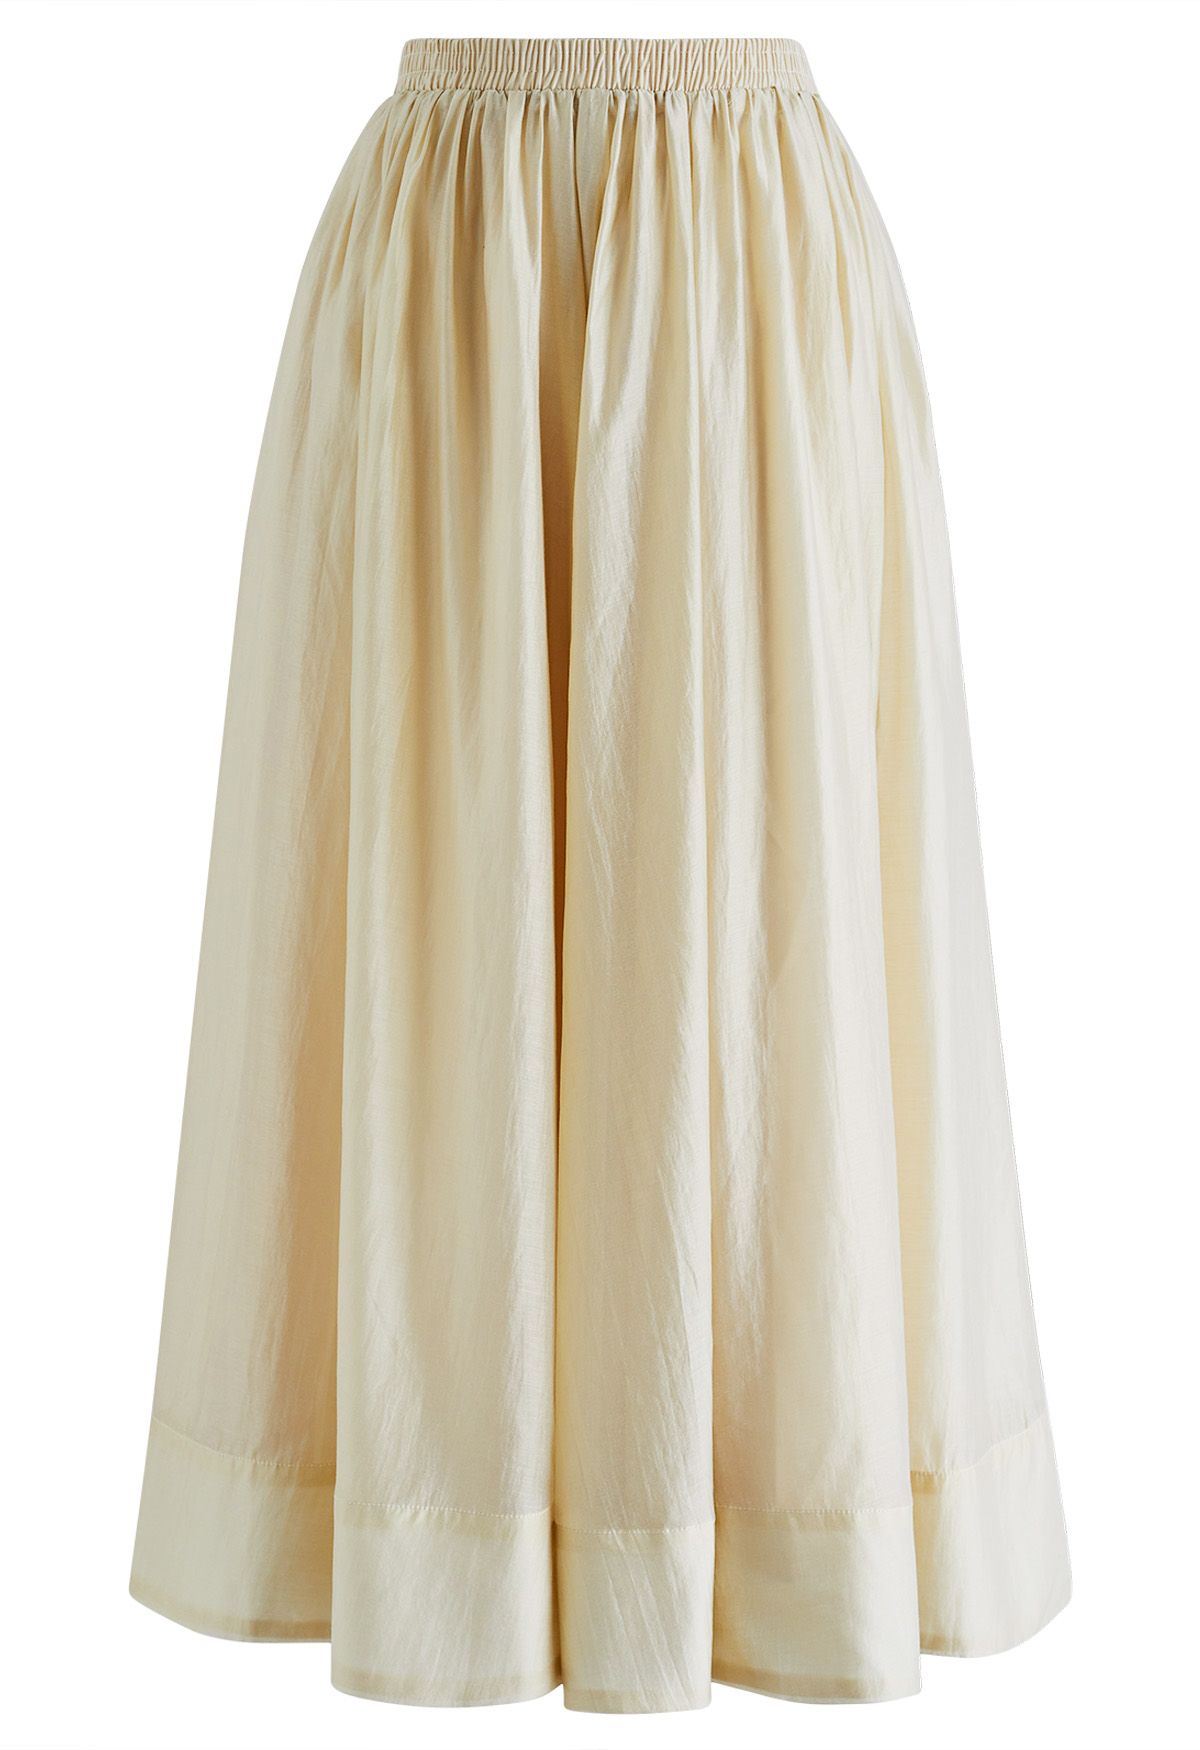 Breathable Soft A-Line Maxi Skirt in Light Yellow - Retro, Indie and ...